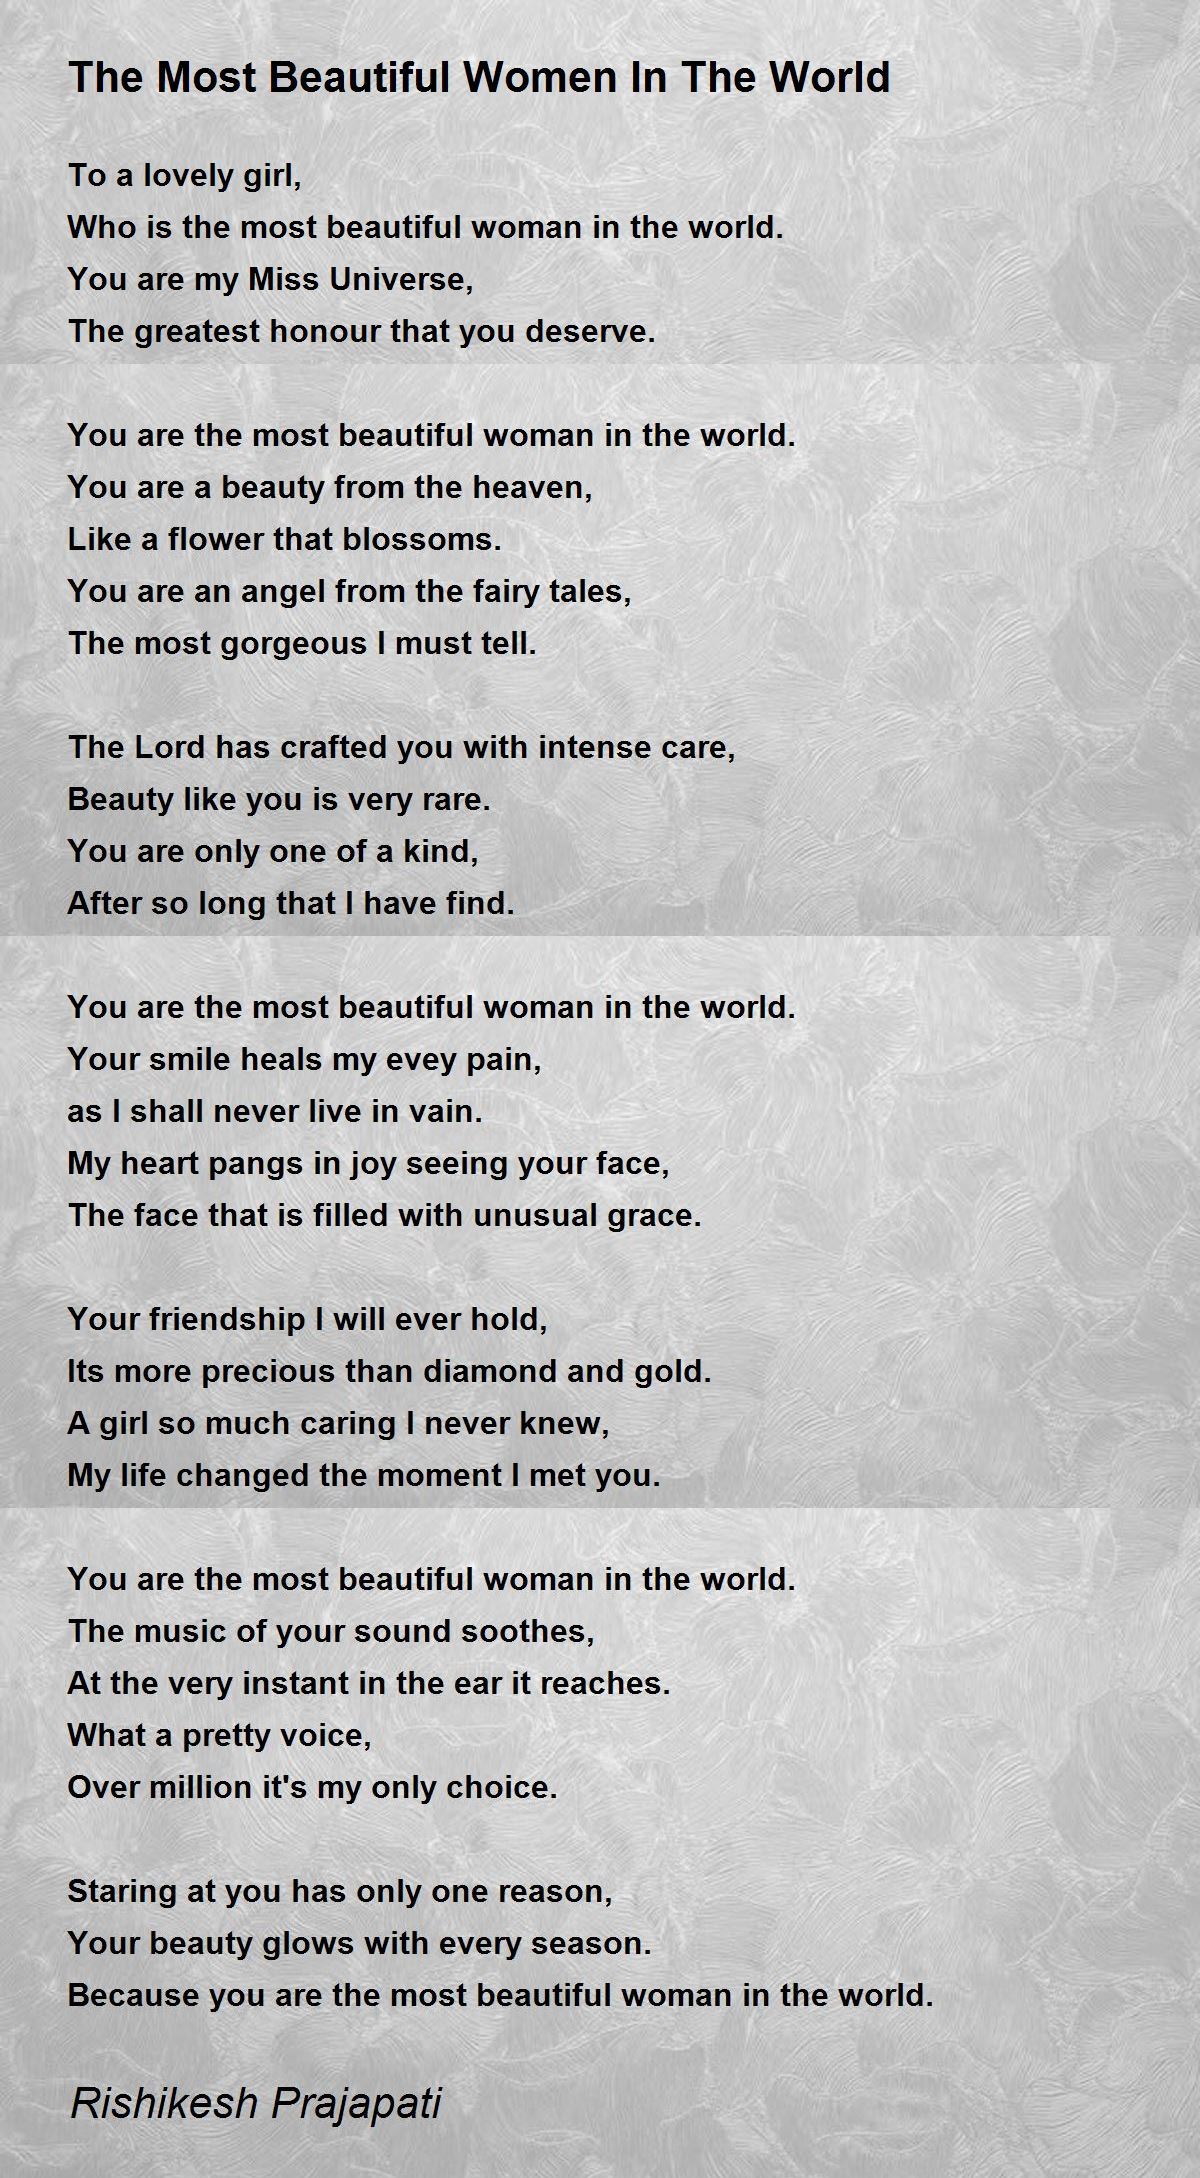 Most Beautiful Women In The World Poem